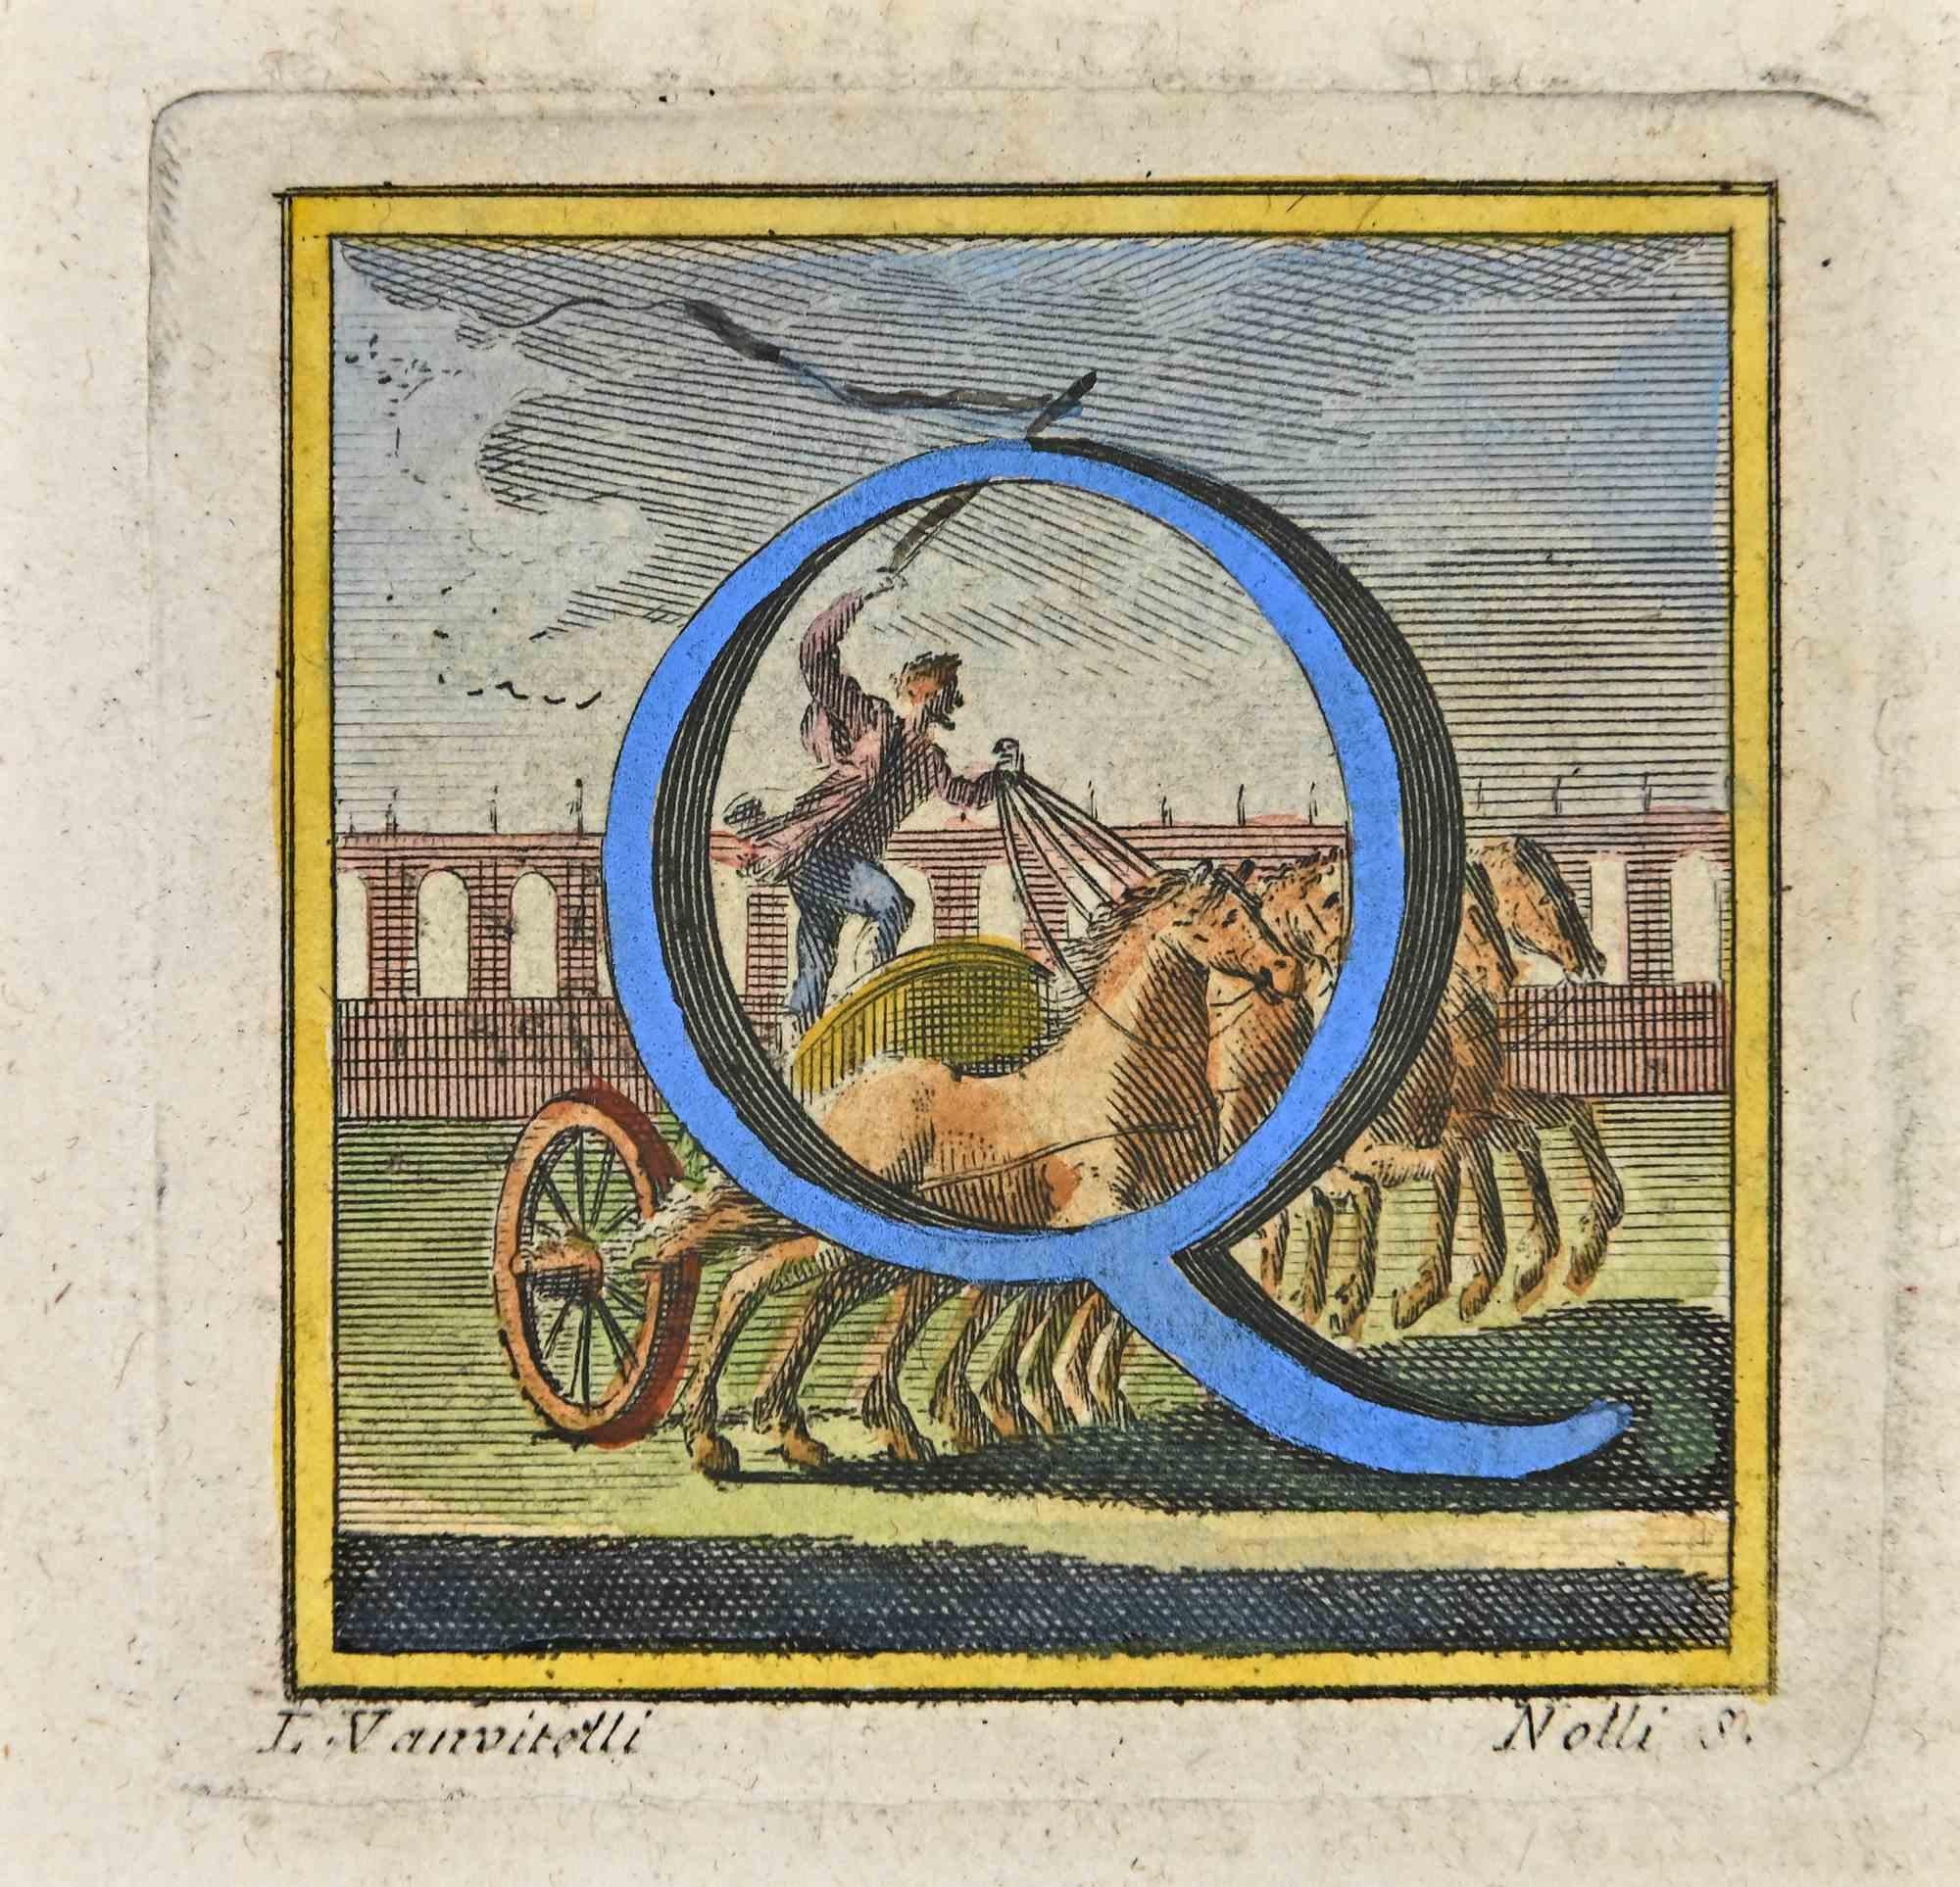 Letter of the Alphabet Q from the series "Antiquities of Herculaneum", is an etching on paper realized by Luigi Vanvitelli in the 18th century.

Signed on the plate.

Good conditions.

The etching belongs to the print suite “Antiquities of